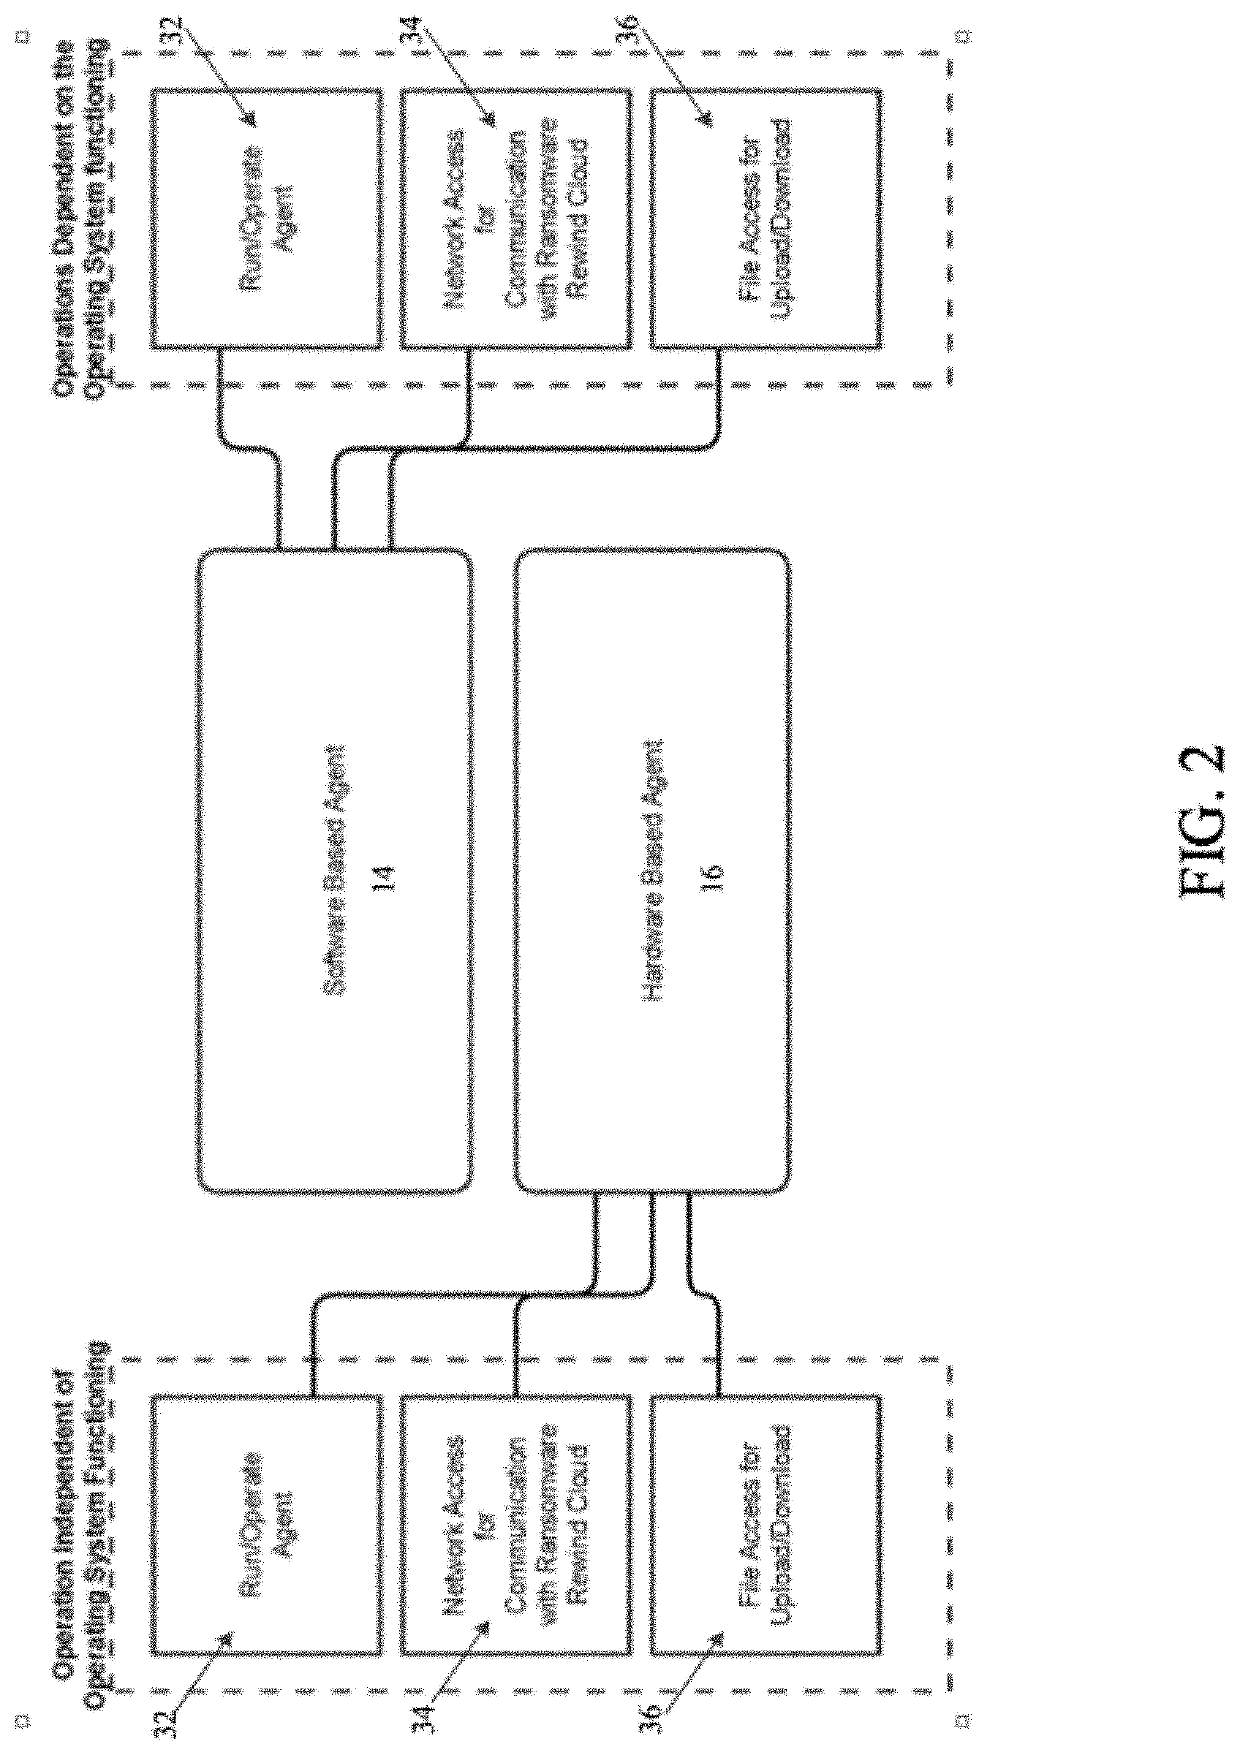 Systems and methods for ransomware detection and mitigation